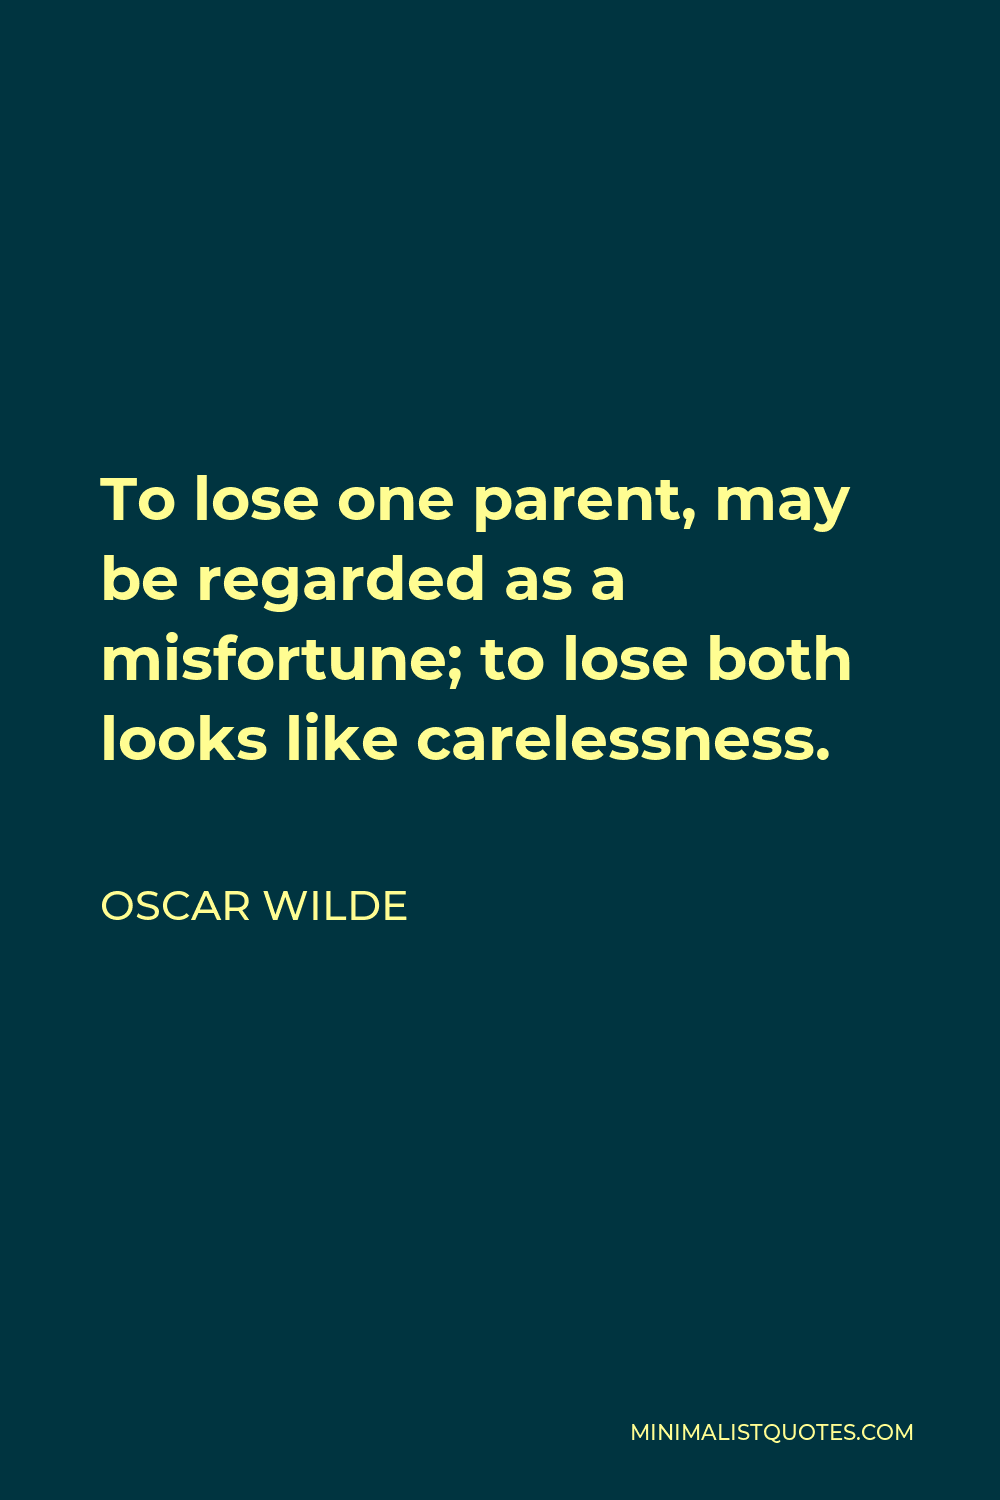 Oscar Wilde Quote - To lose one parent, may be regarded as a misfortune; to lose both looks like carelessness.